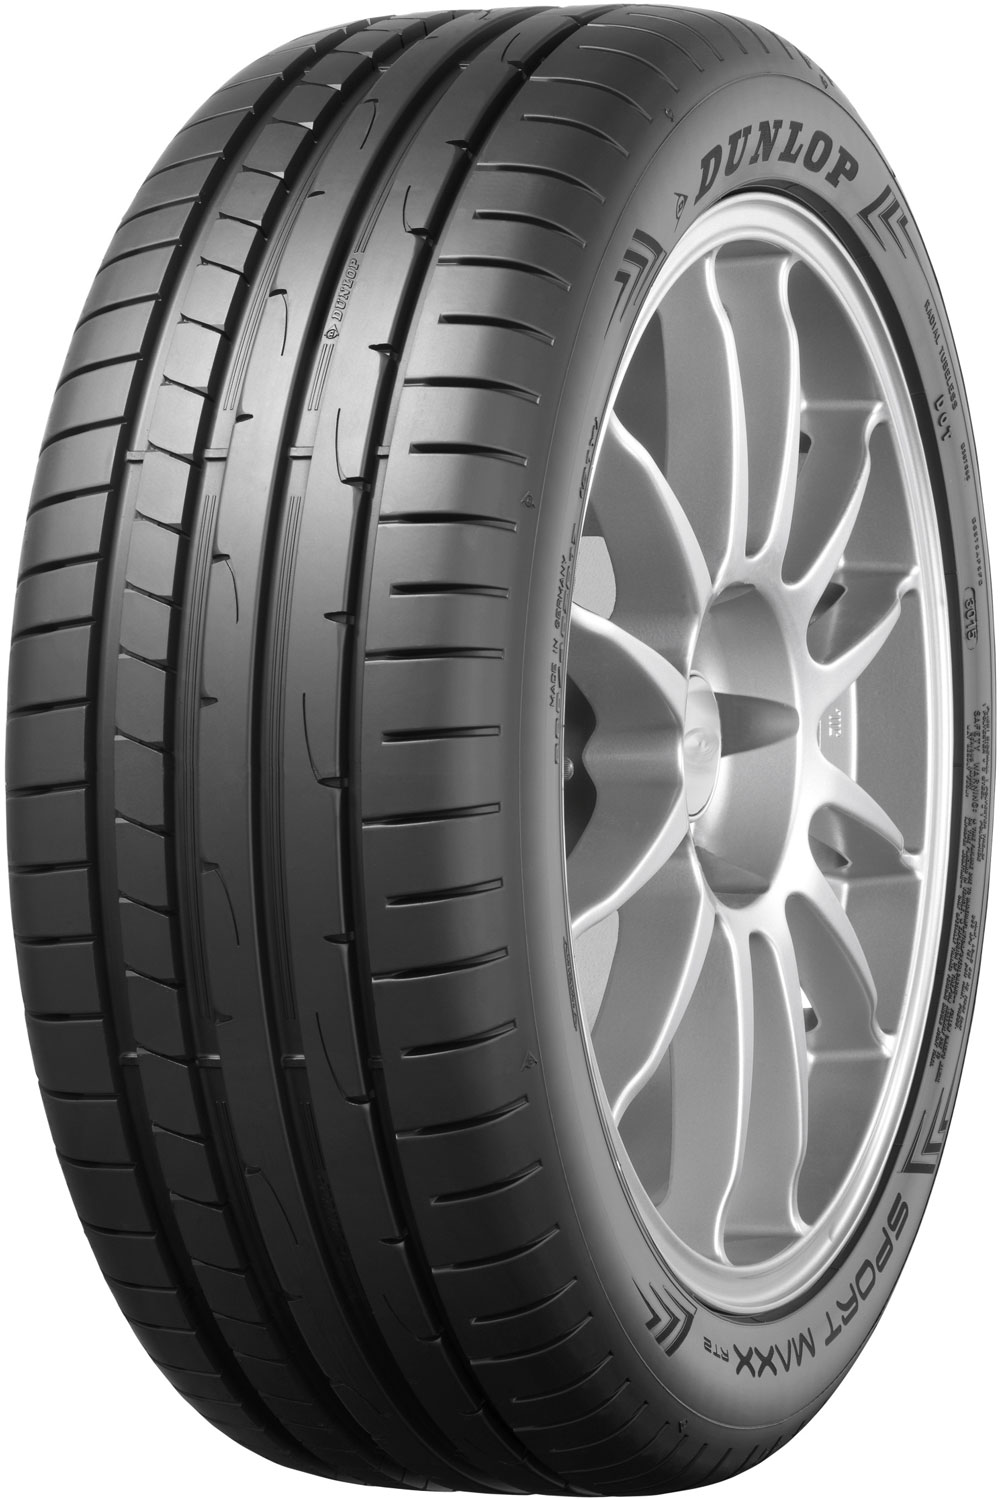 Anvelope auto DUNLOP SP MAXX RT 2*MO MERCEDES FP DOT 2022 225/55 R17 97Y